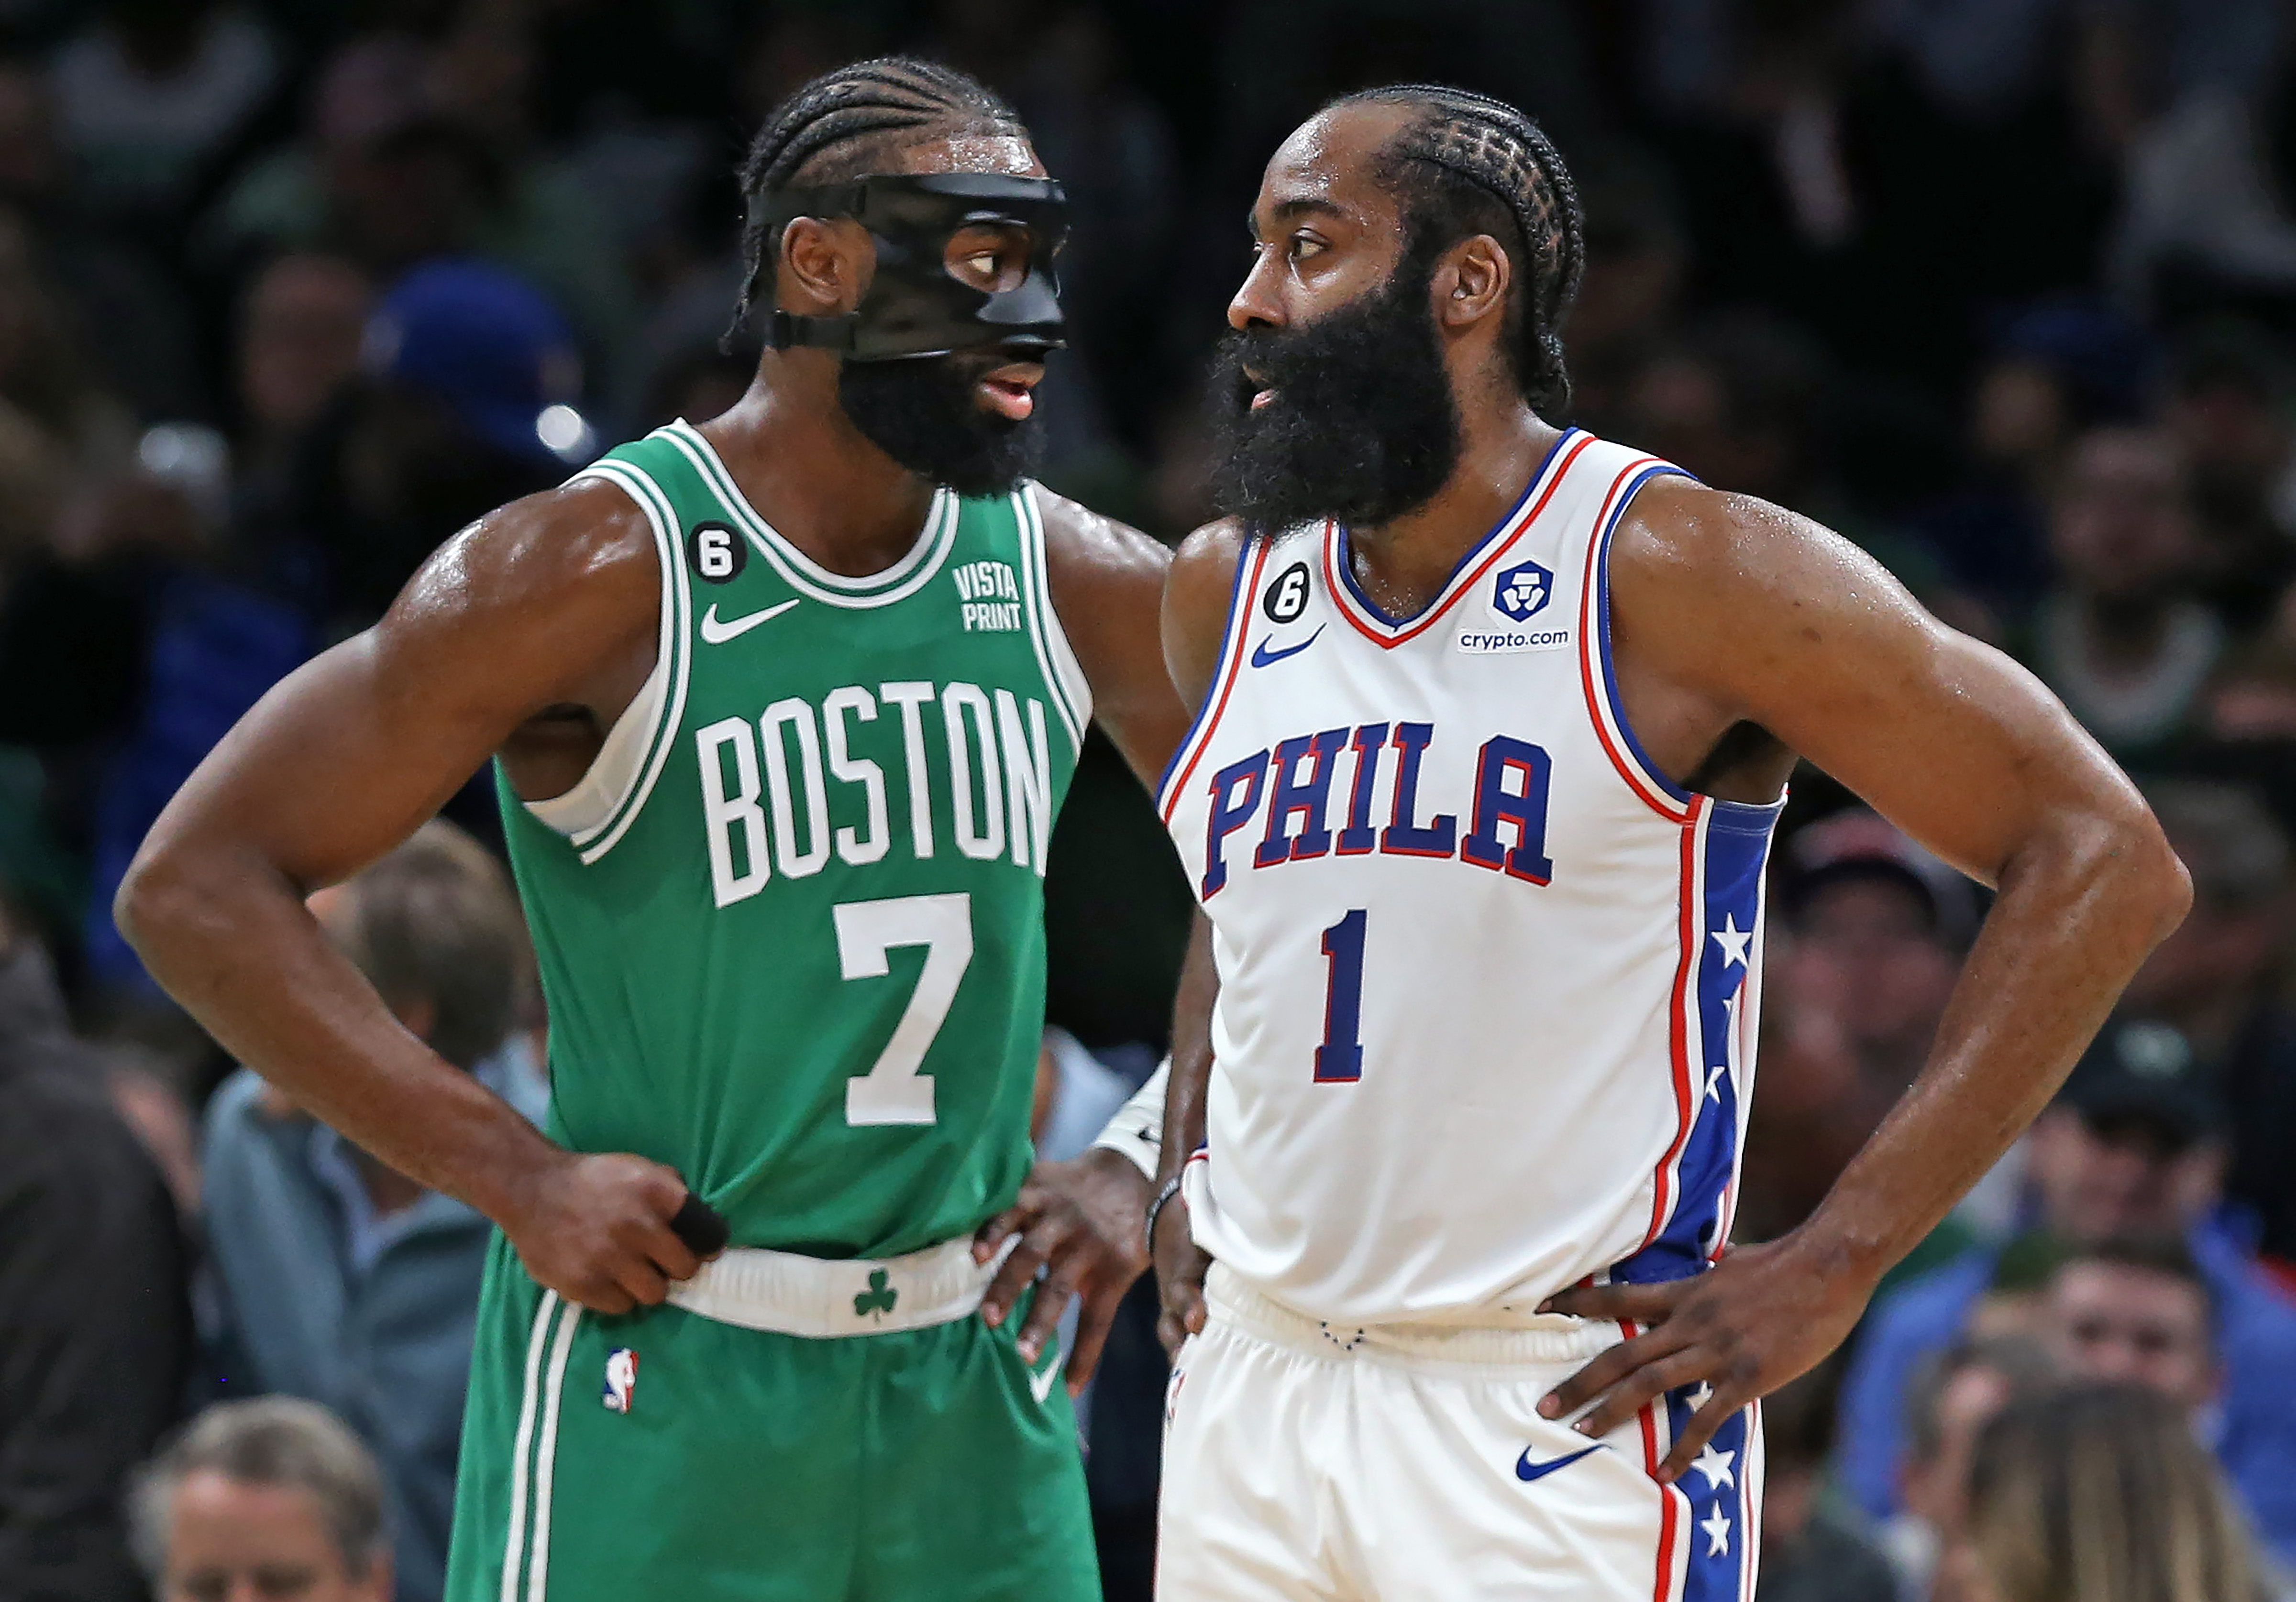 Celtics season preview: Can they persevere and get back to the